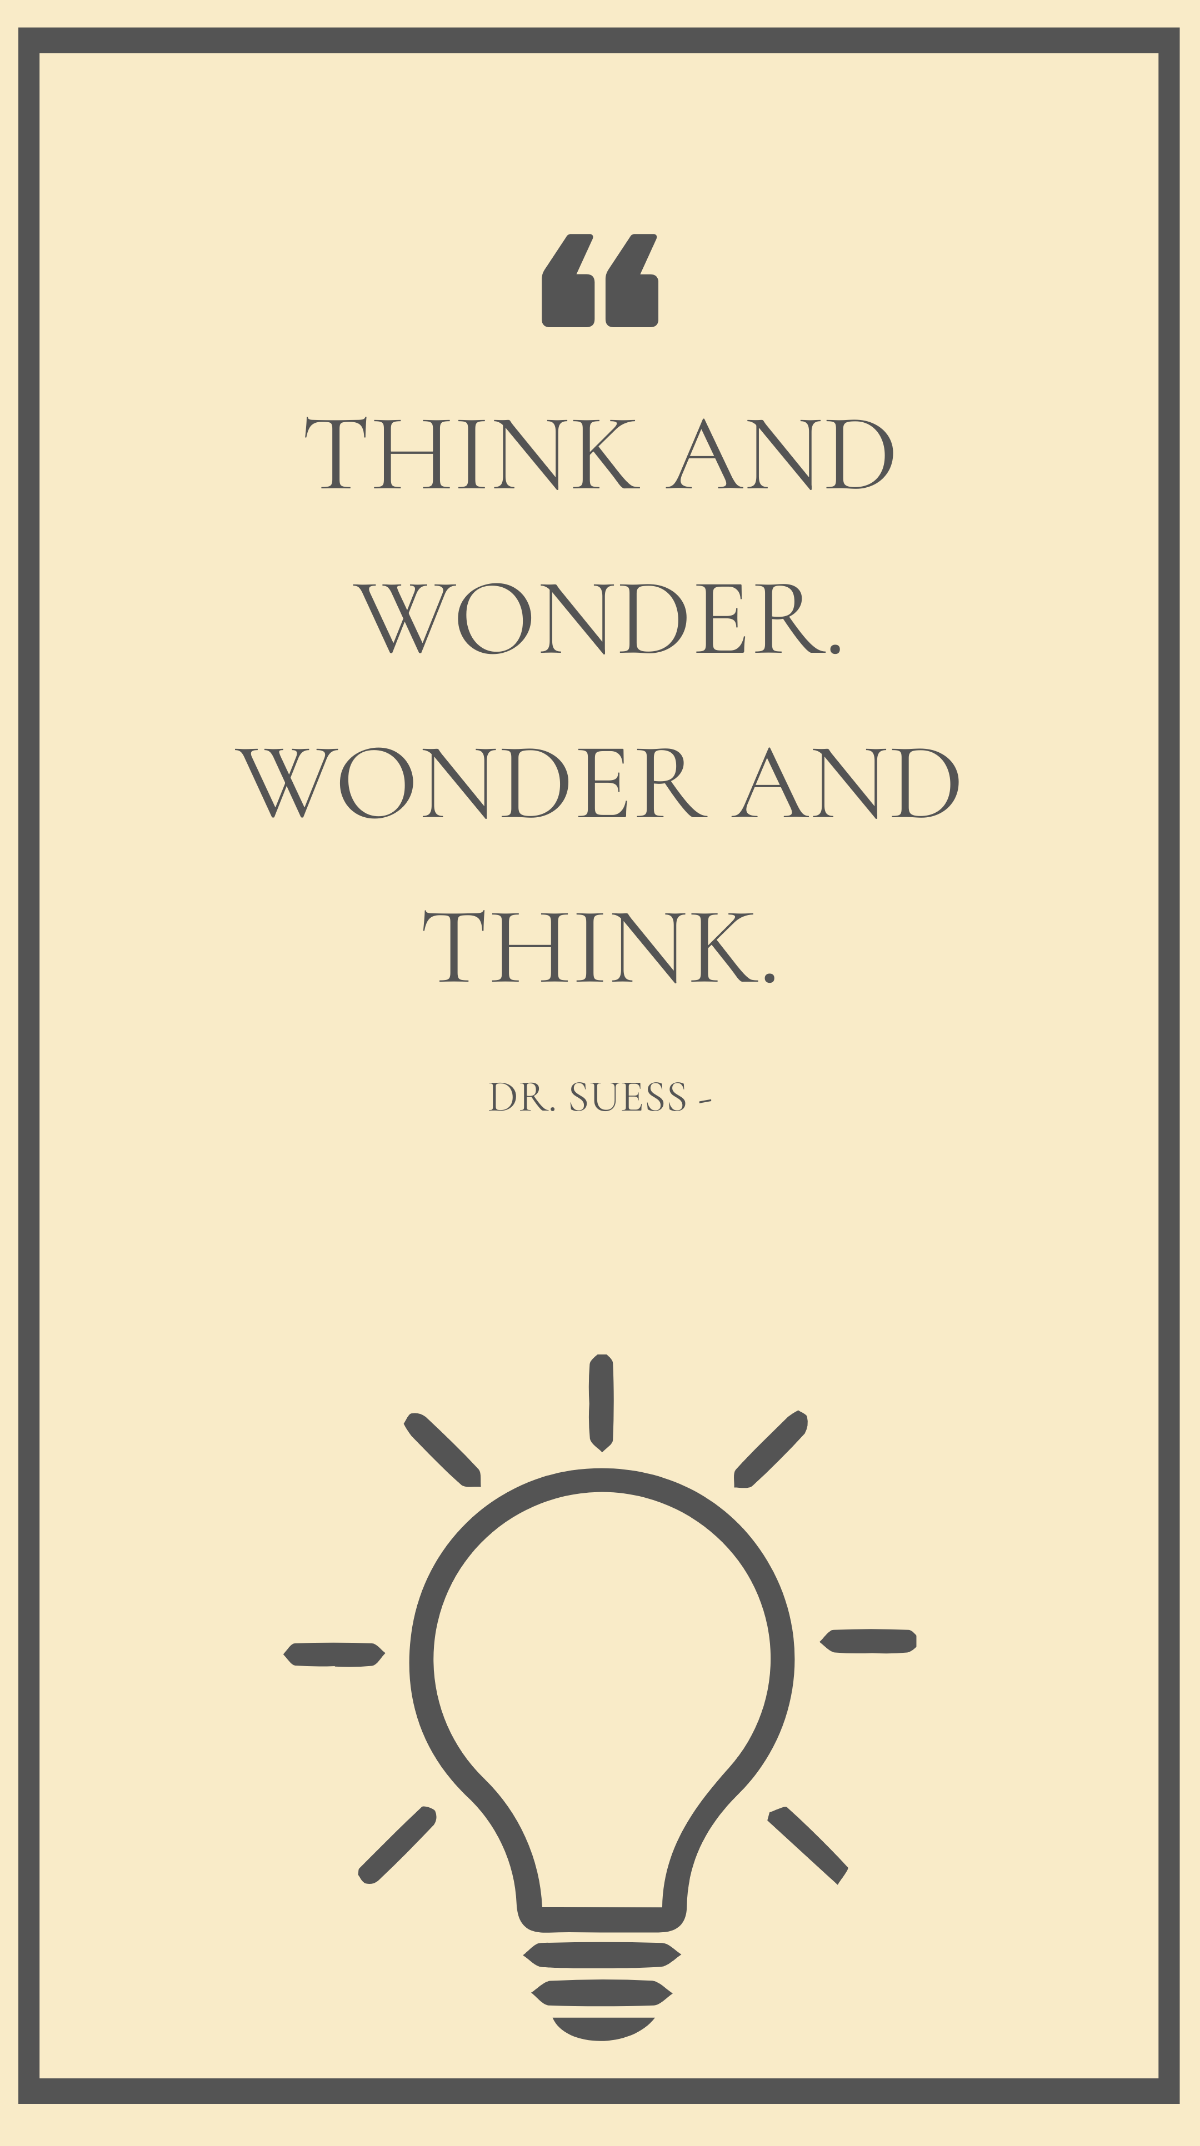 Dr. Suess - Think and wonder. Wonder and think. Template